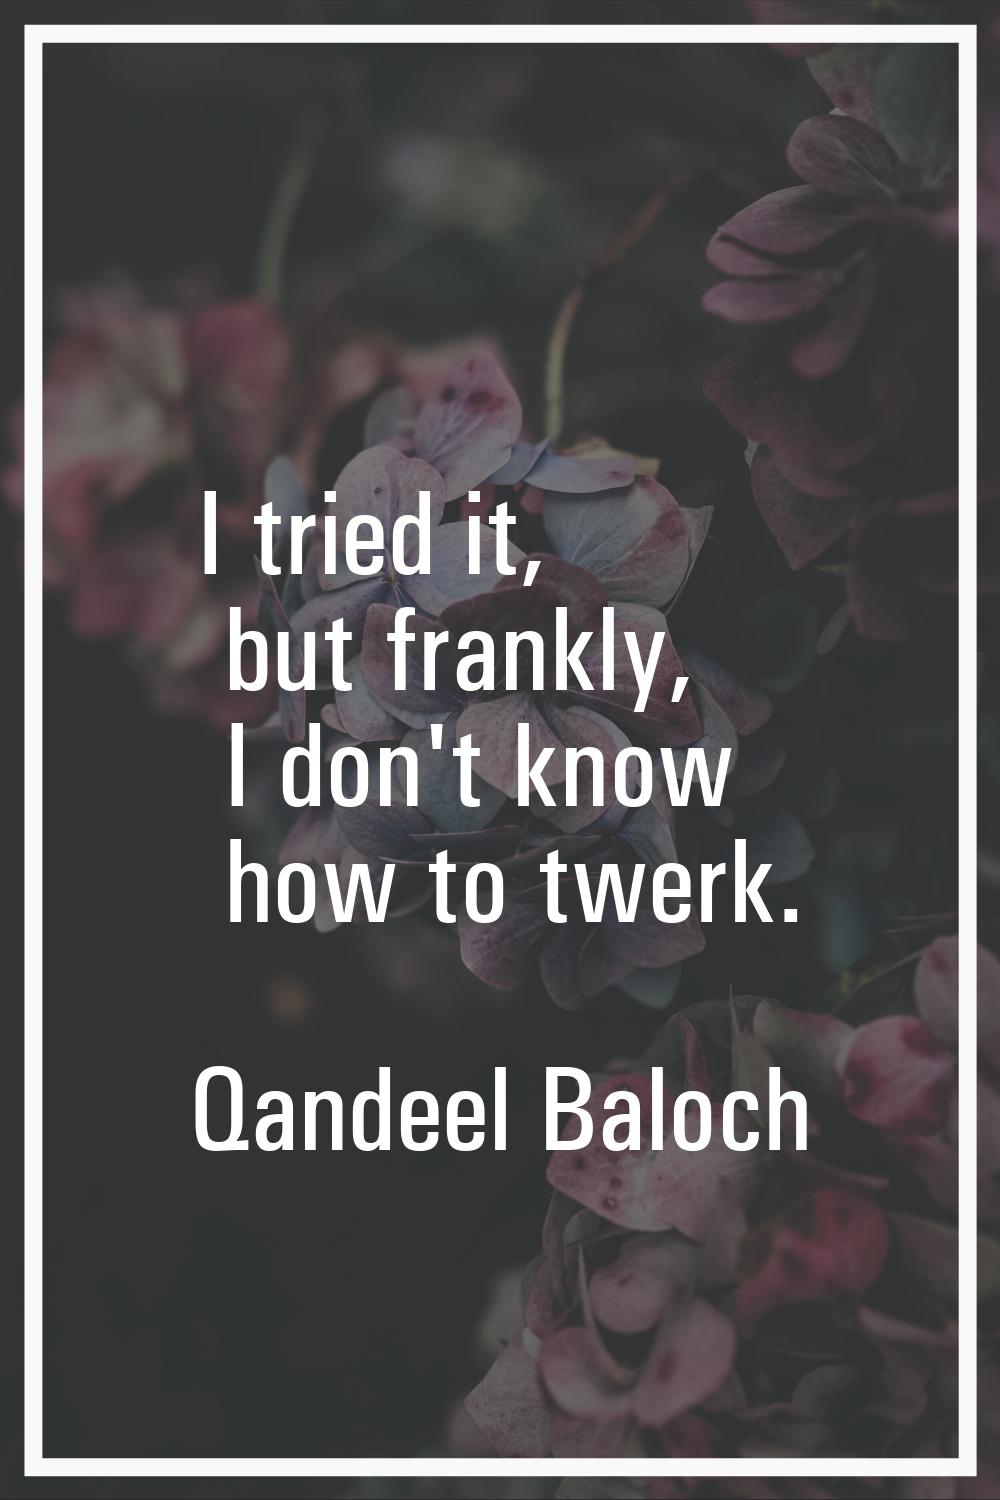 I tried it, but frankly, I don't know how to twerk.